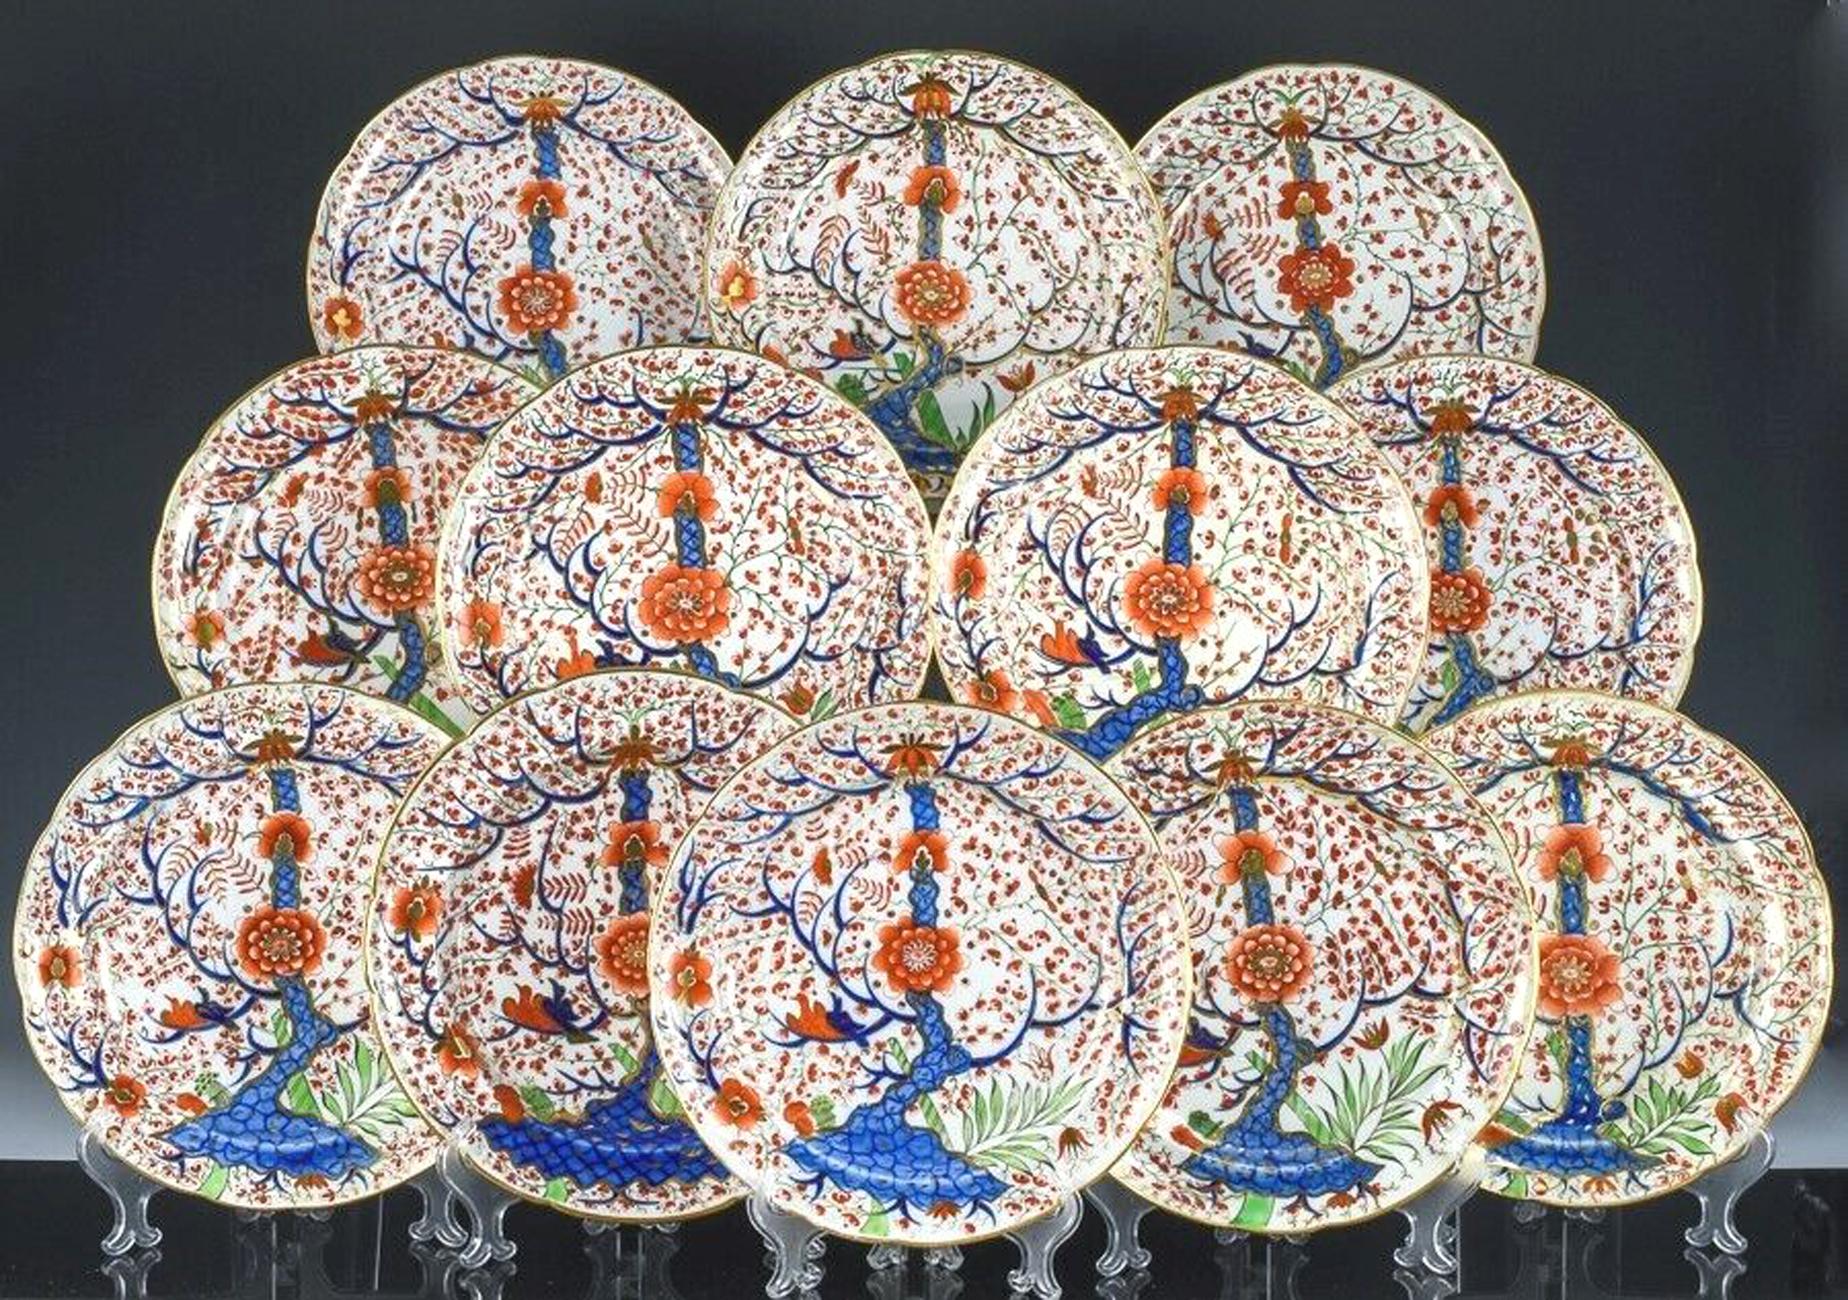 Chamberlain Worcester Porcelain Set of Twelve Dinner Plates,
Tree of Life Pattern,
Circa 1818-1822

The Chamberlain Worcester porcelain Tree of Life dinner plates are painted in an ornate and colorful pattern known as the 